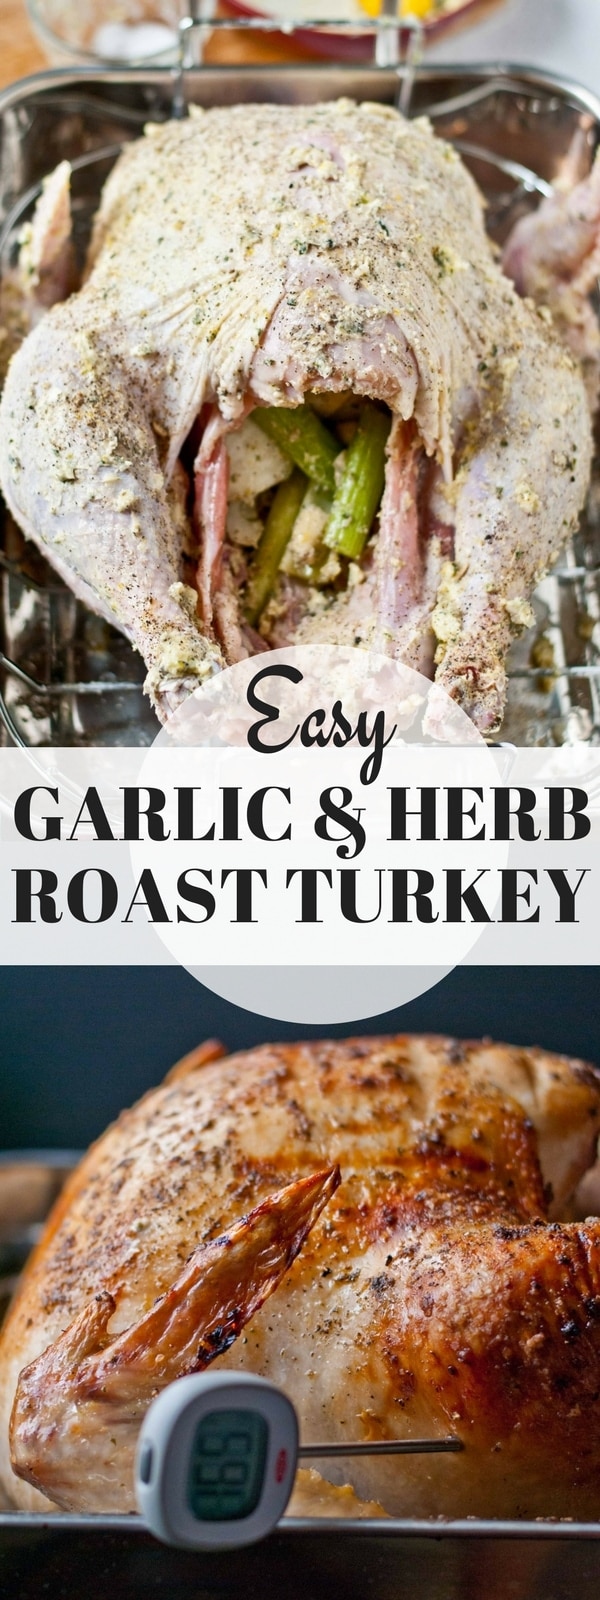 Roasting a turkey doesn't have to be hard! We make this easy Garlic and Herb Roasted Turkey every year and it's always moist and delicious!